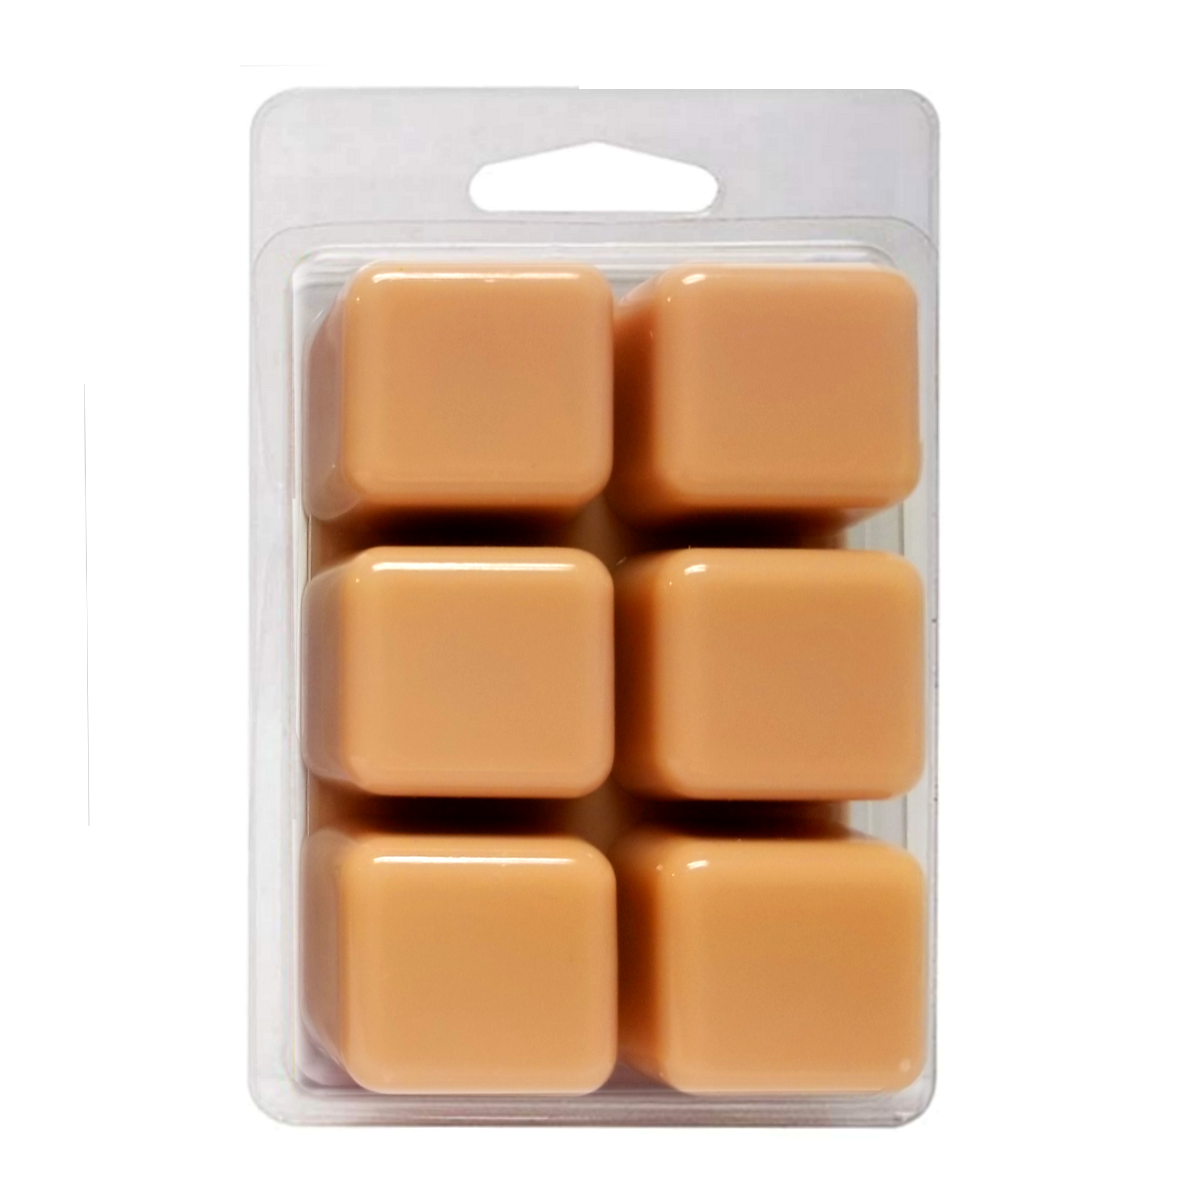 Sugared Maple - 3.2 oz Clamshell